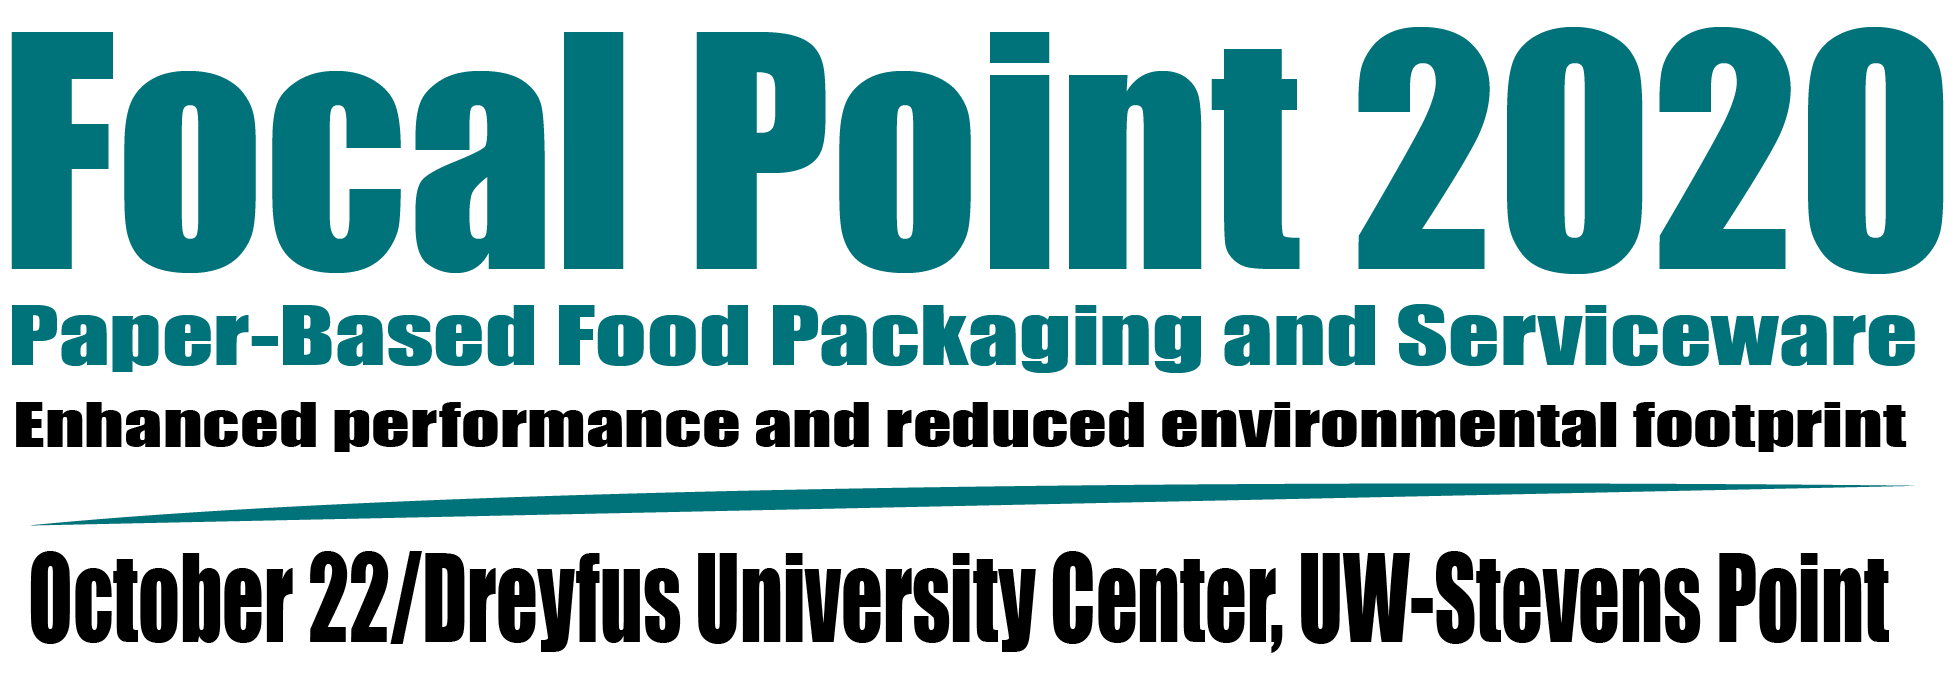 Focal Point Annual Conference -- Paper-Based Food Packaging and Serviceware